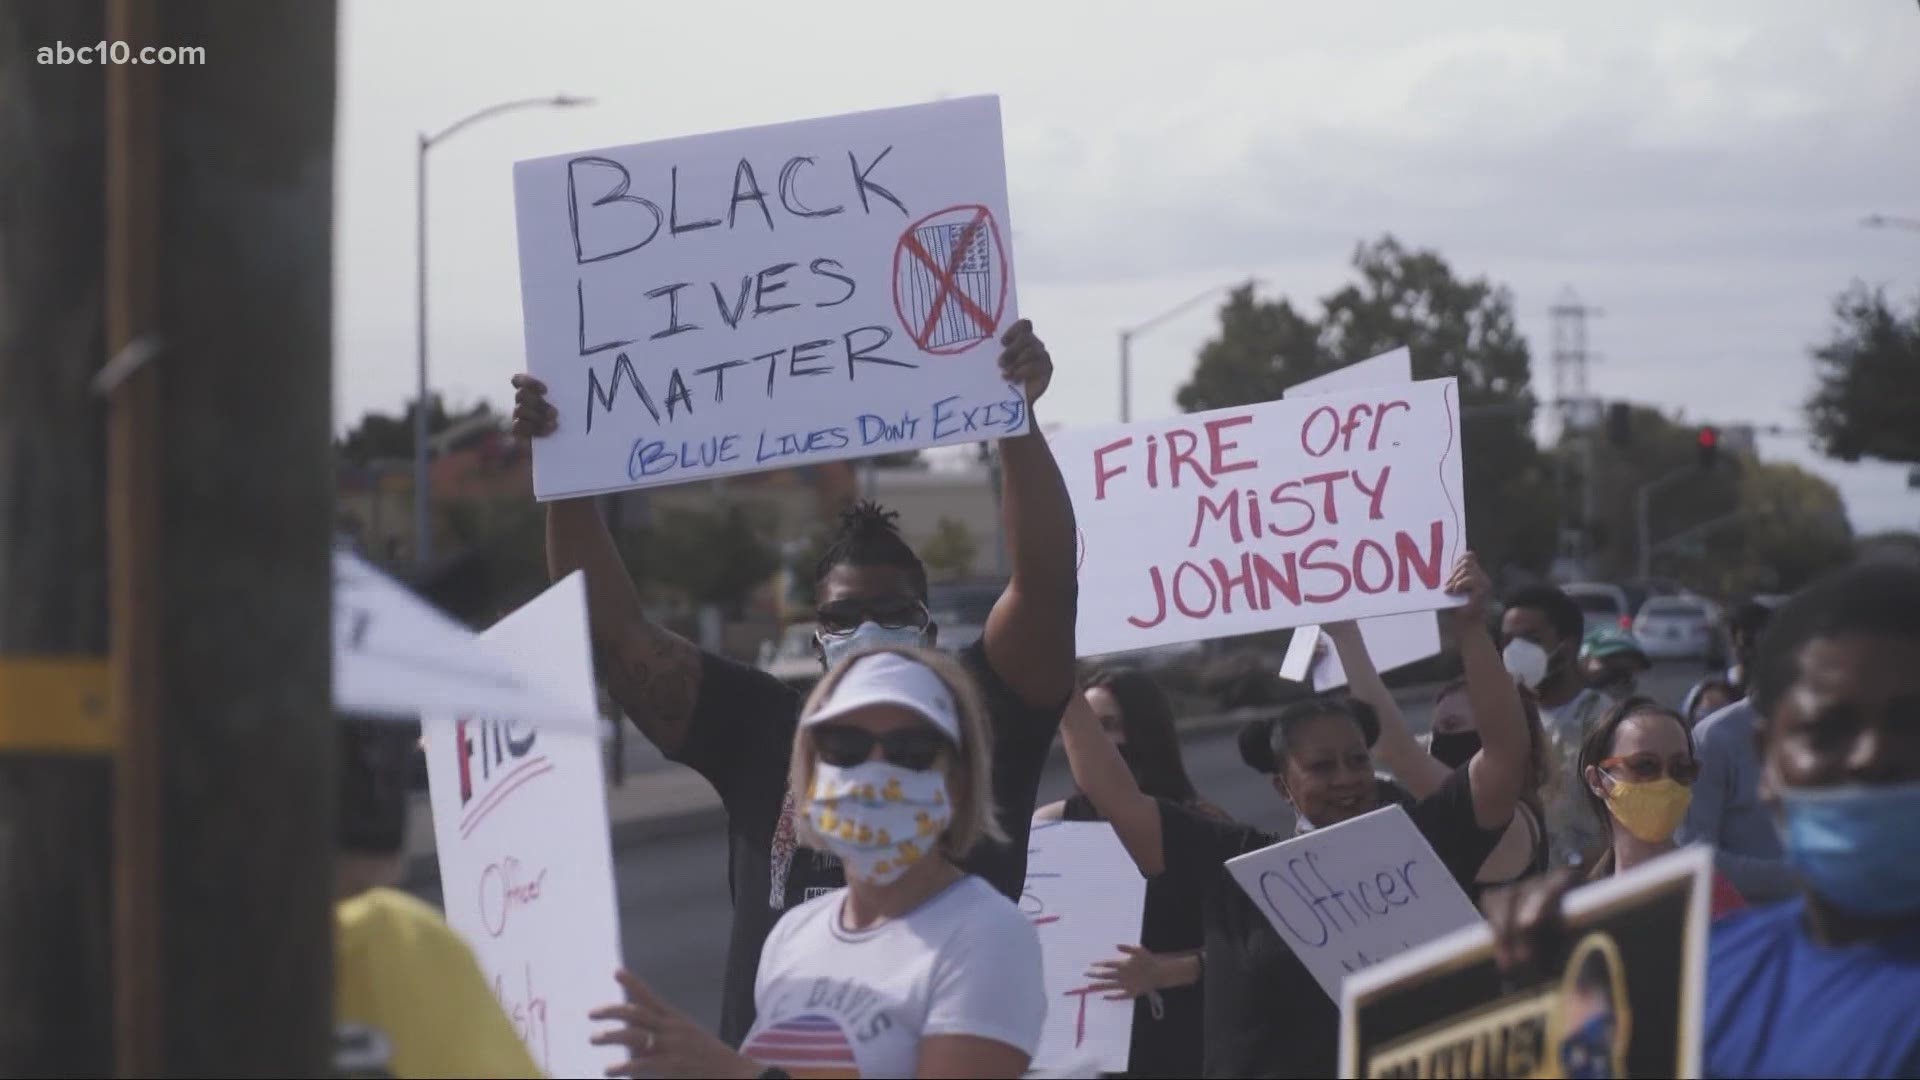 Black Lives Matter Sacramento protested outside of Misty Johnson's home, who was accused in a viral video of harassing a Black teenager during a traffic stop.